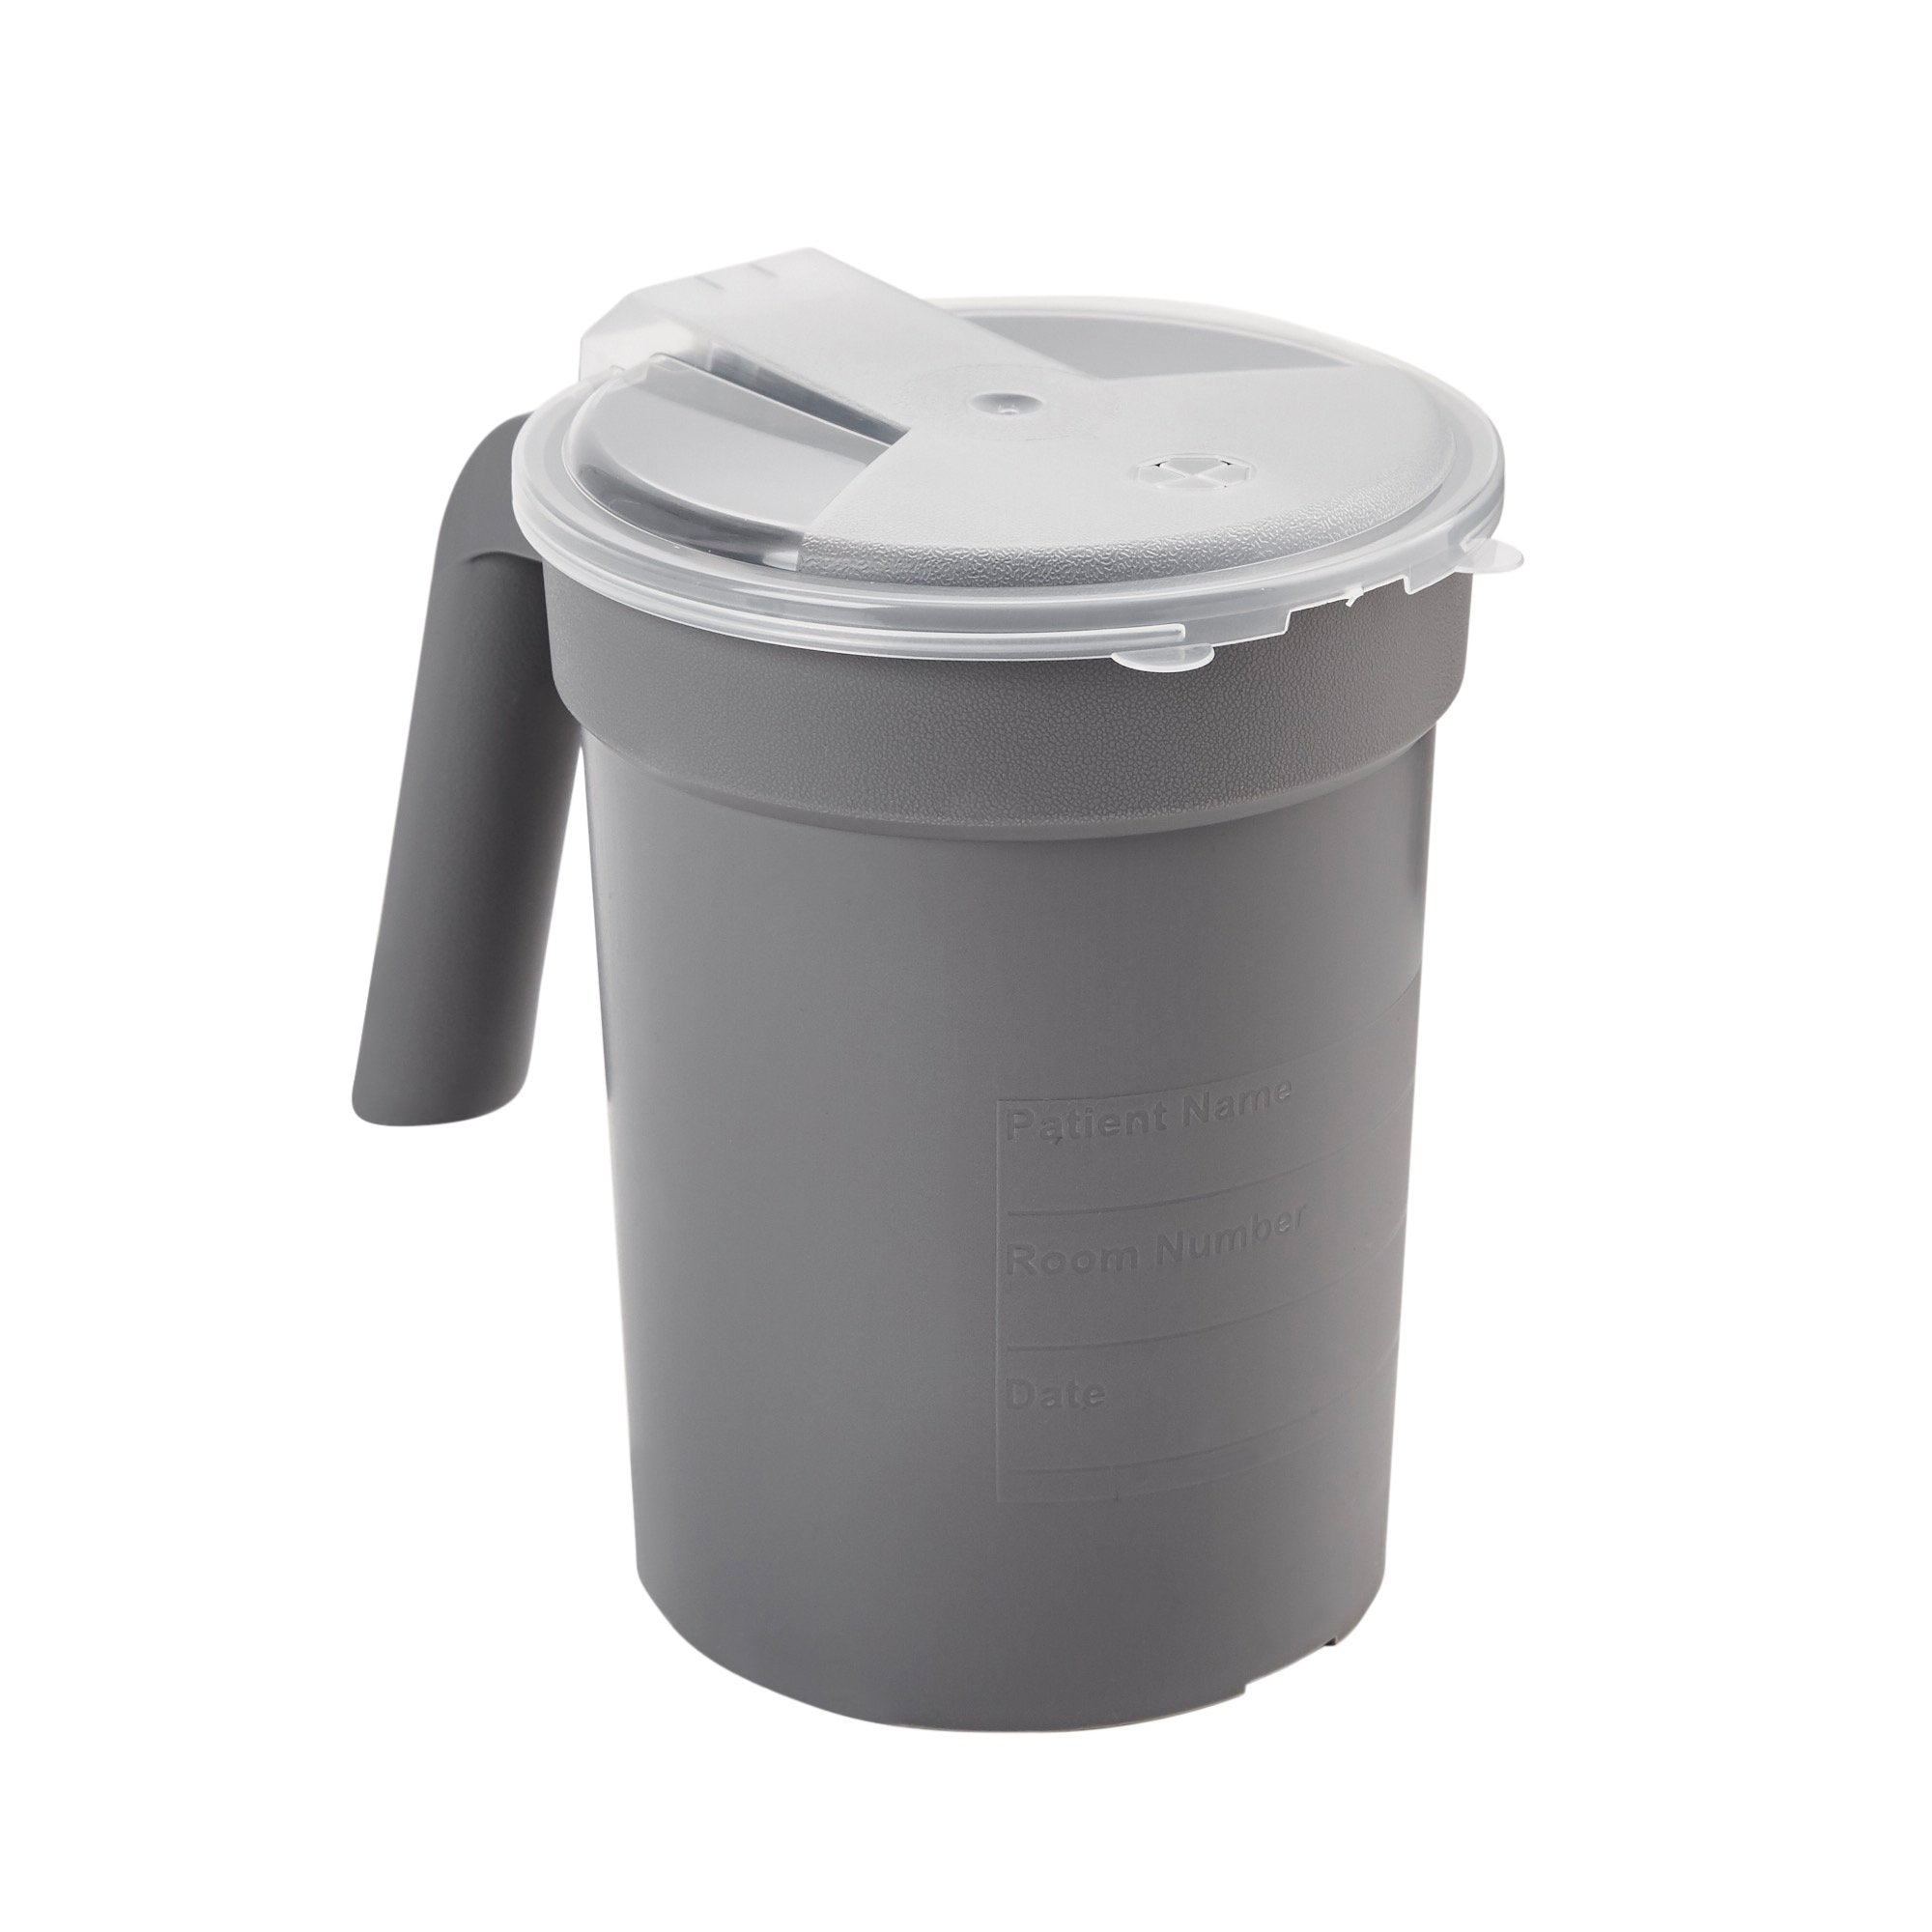 Household>Pitchers & Containers - McKesson - Wasatch Medical Supply